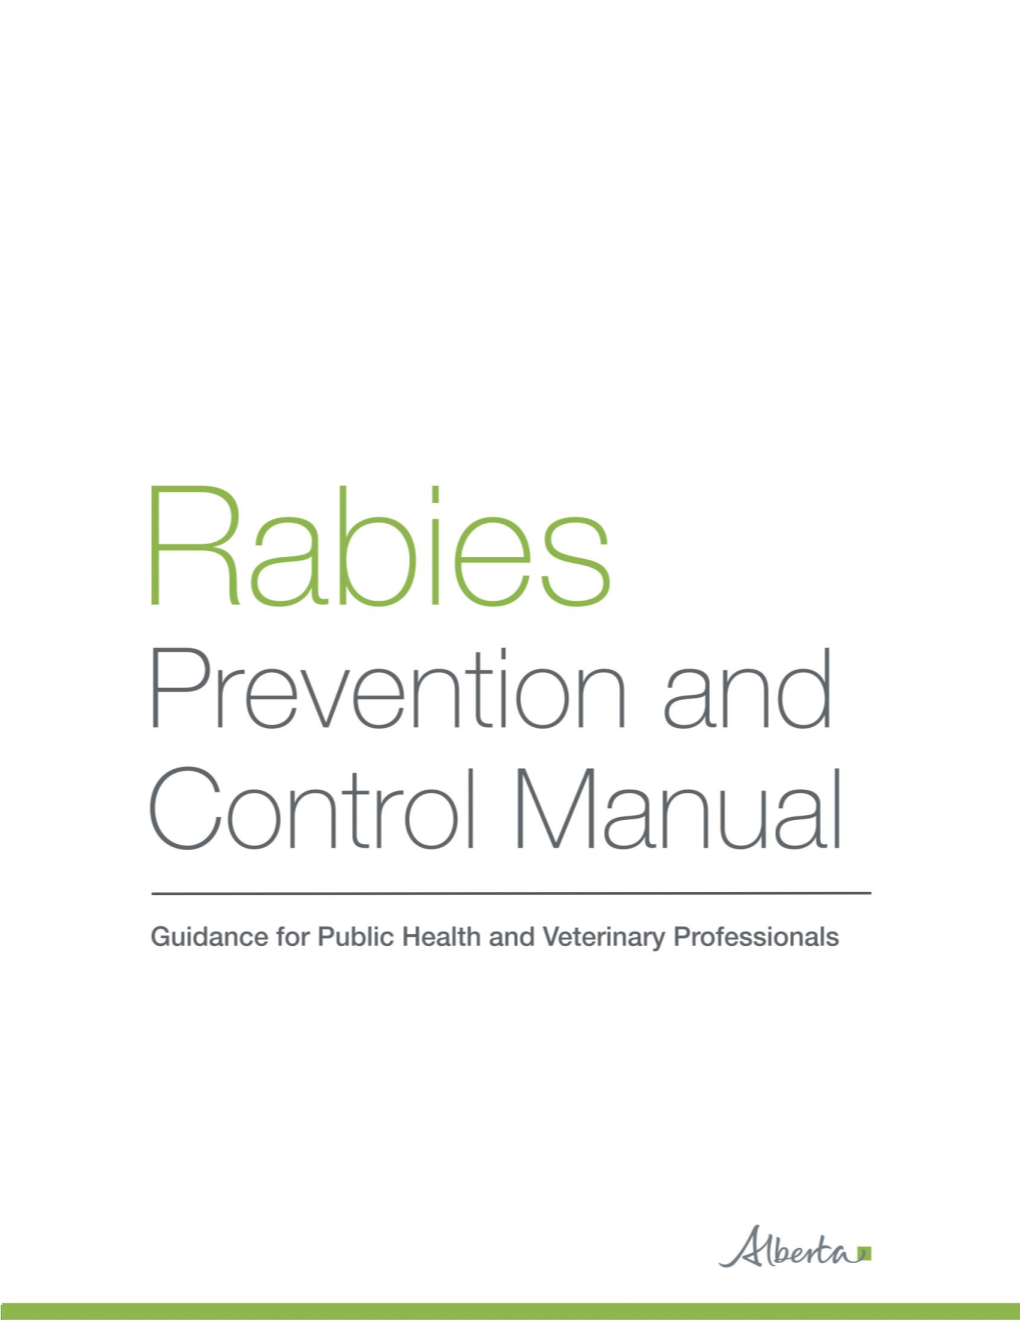 Rabies Prevention and Control Manual : Guidance for Public Health and Veterinary Professionals